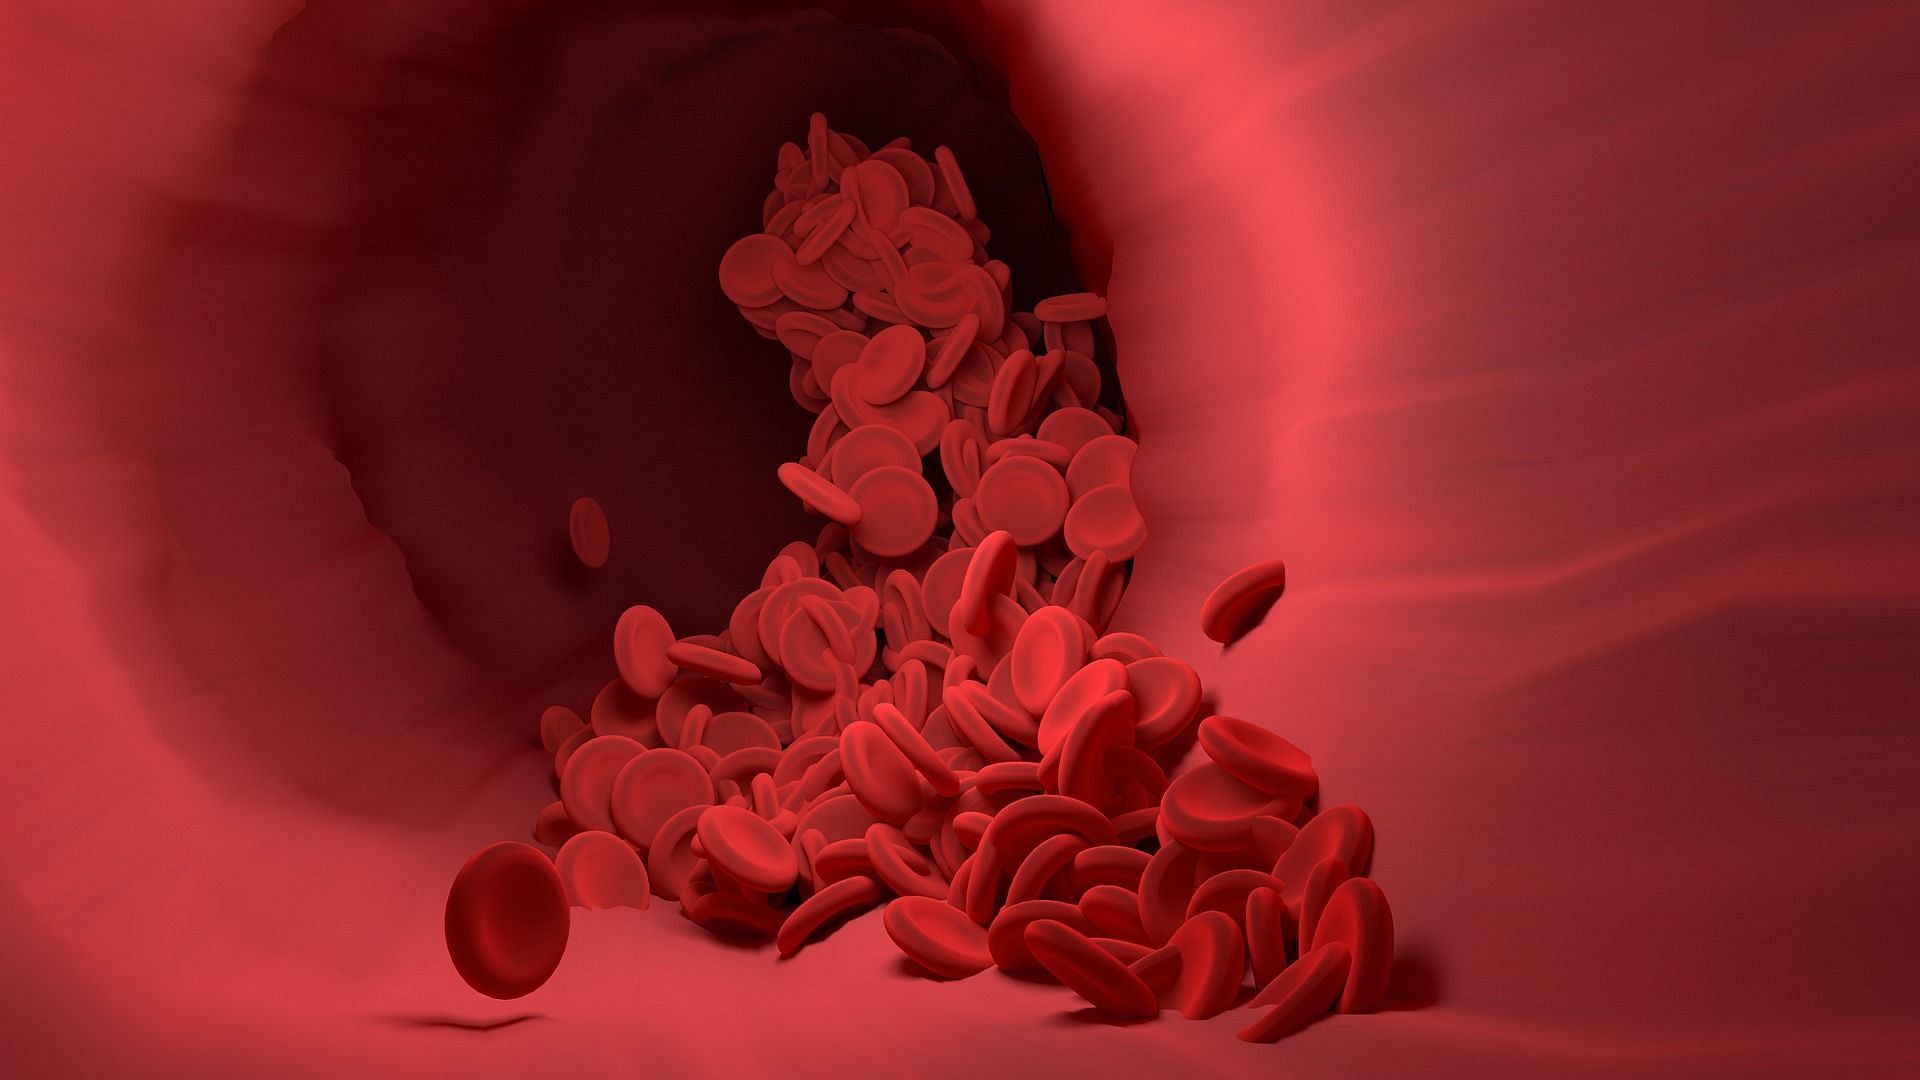 Red blood cells (RBCs) play a vital role in delivering oxygen to tissues throughout the body. (Image via Pexels)